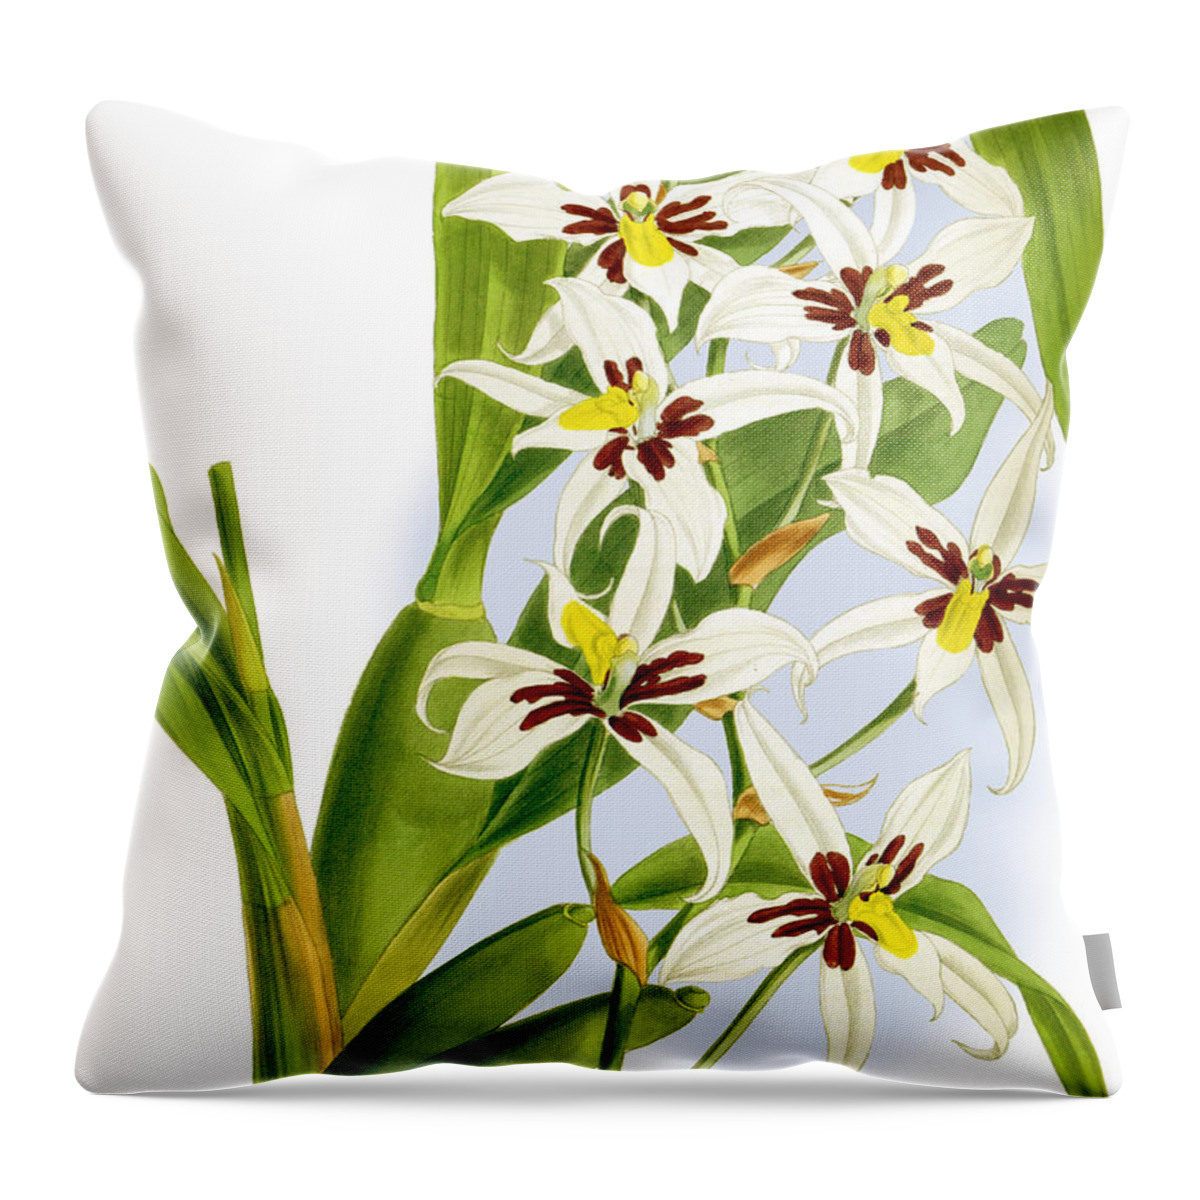 Orchid Throw Pillow featuring the mixed media Odontoglossum Madrense Orchid by World Art Collective